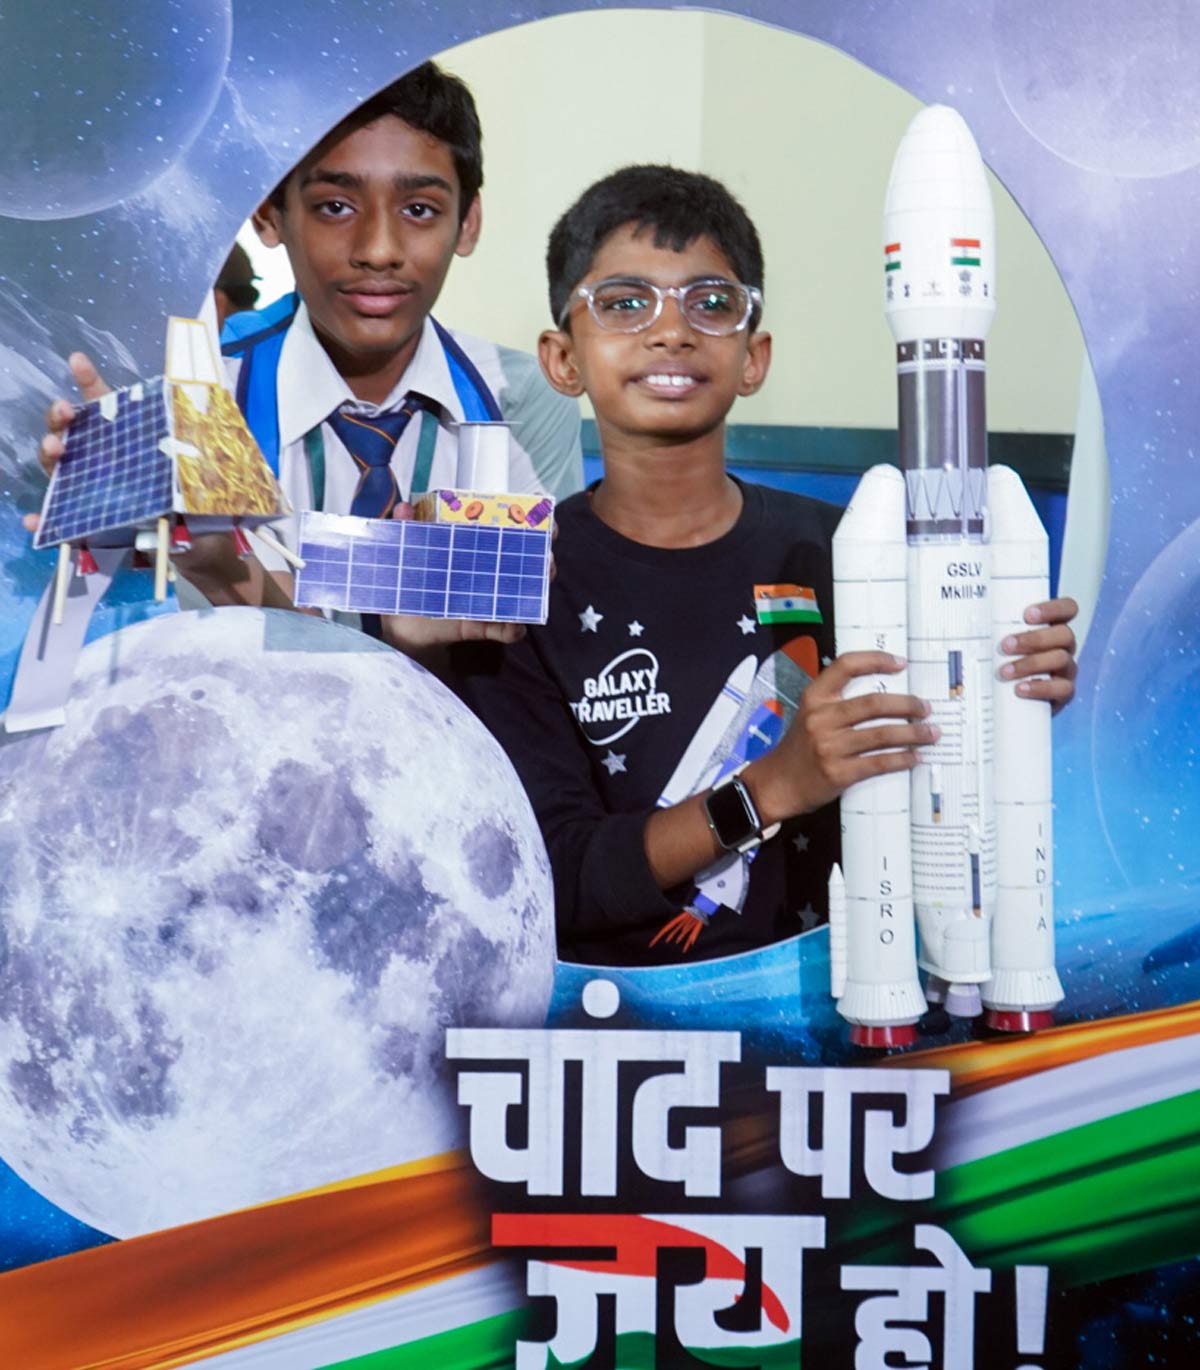 Proud to be your partner: US to India on Chandrayaan